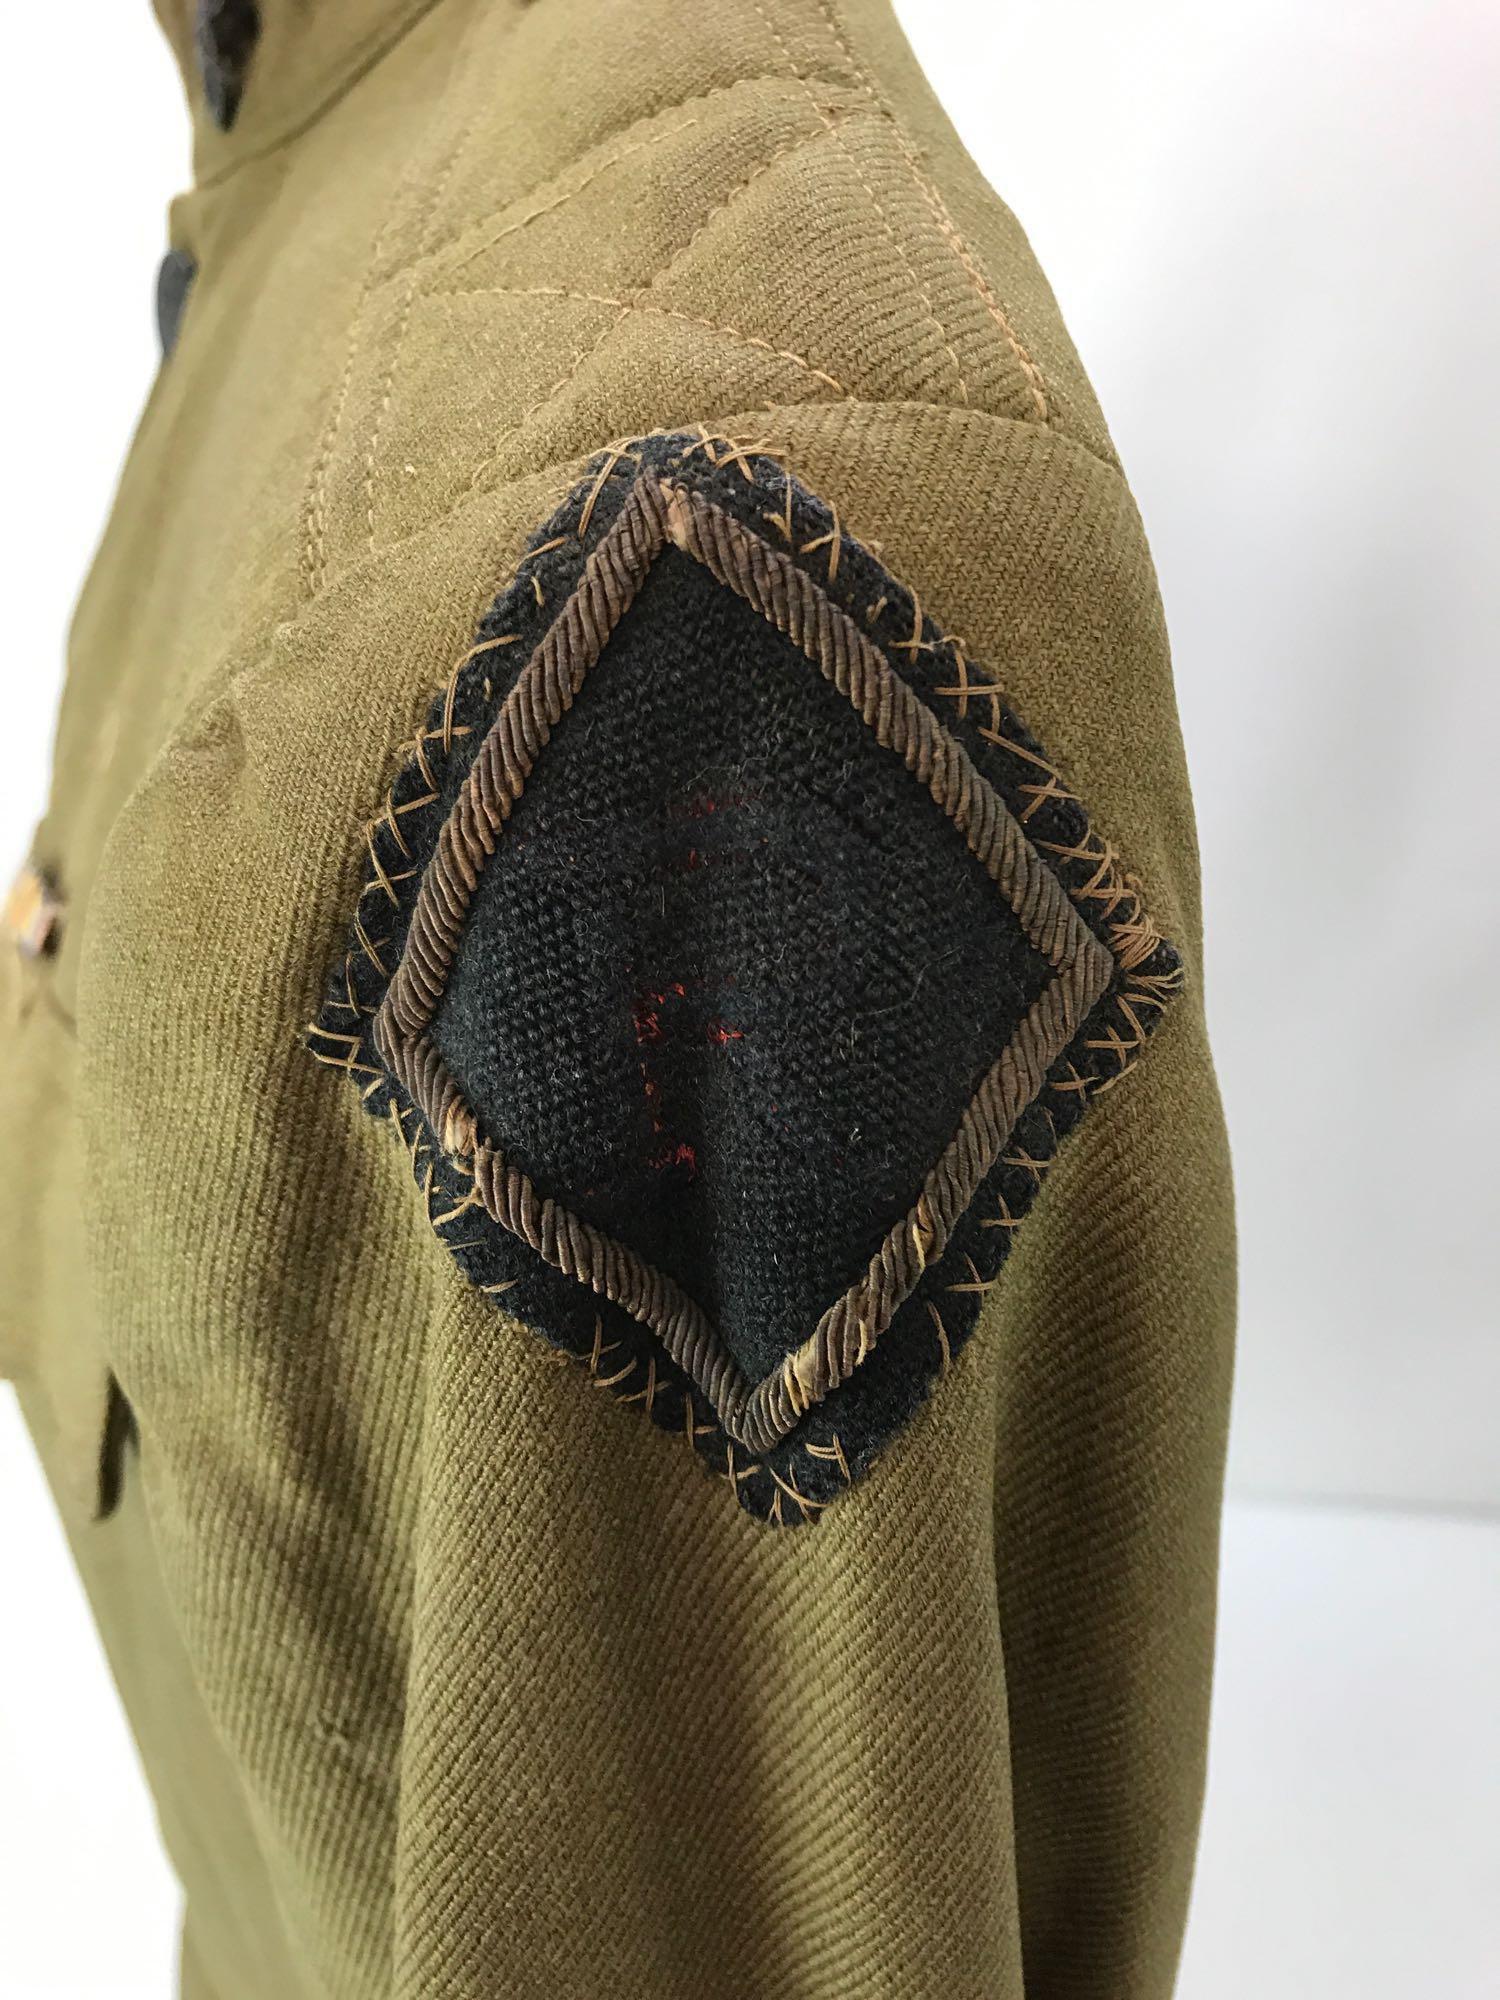 WW1 U.S. Army Quarter Master Corp. 5th Division Tunic with Medal and Patches